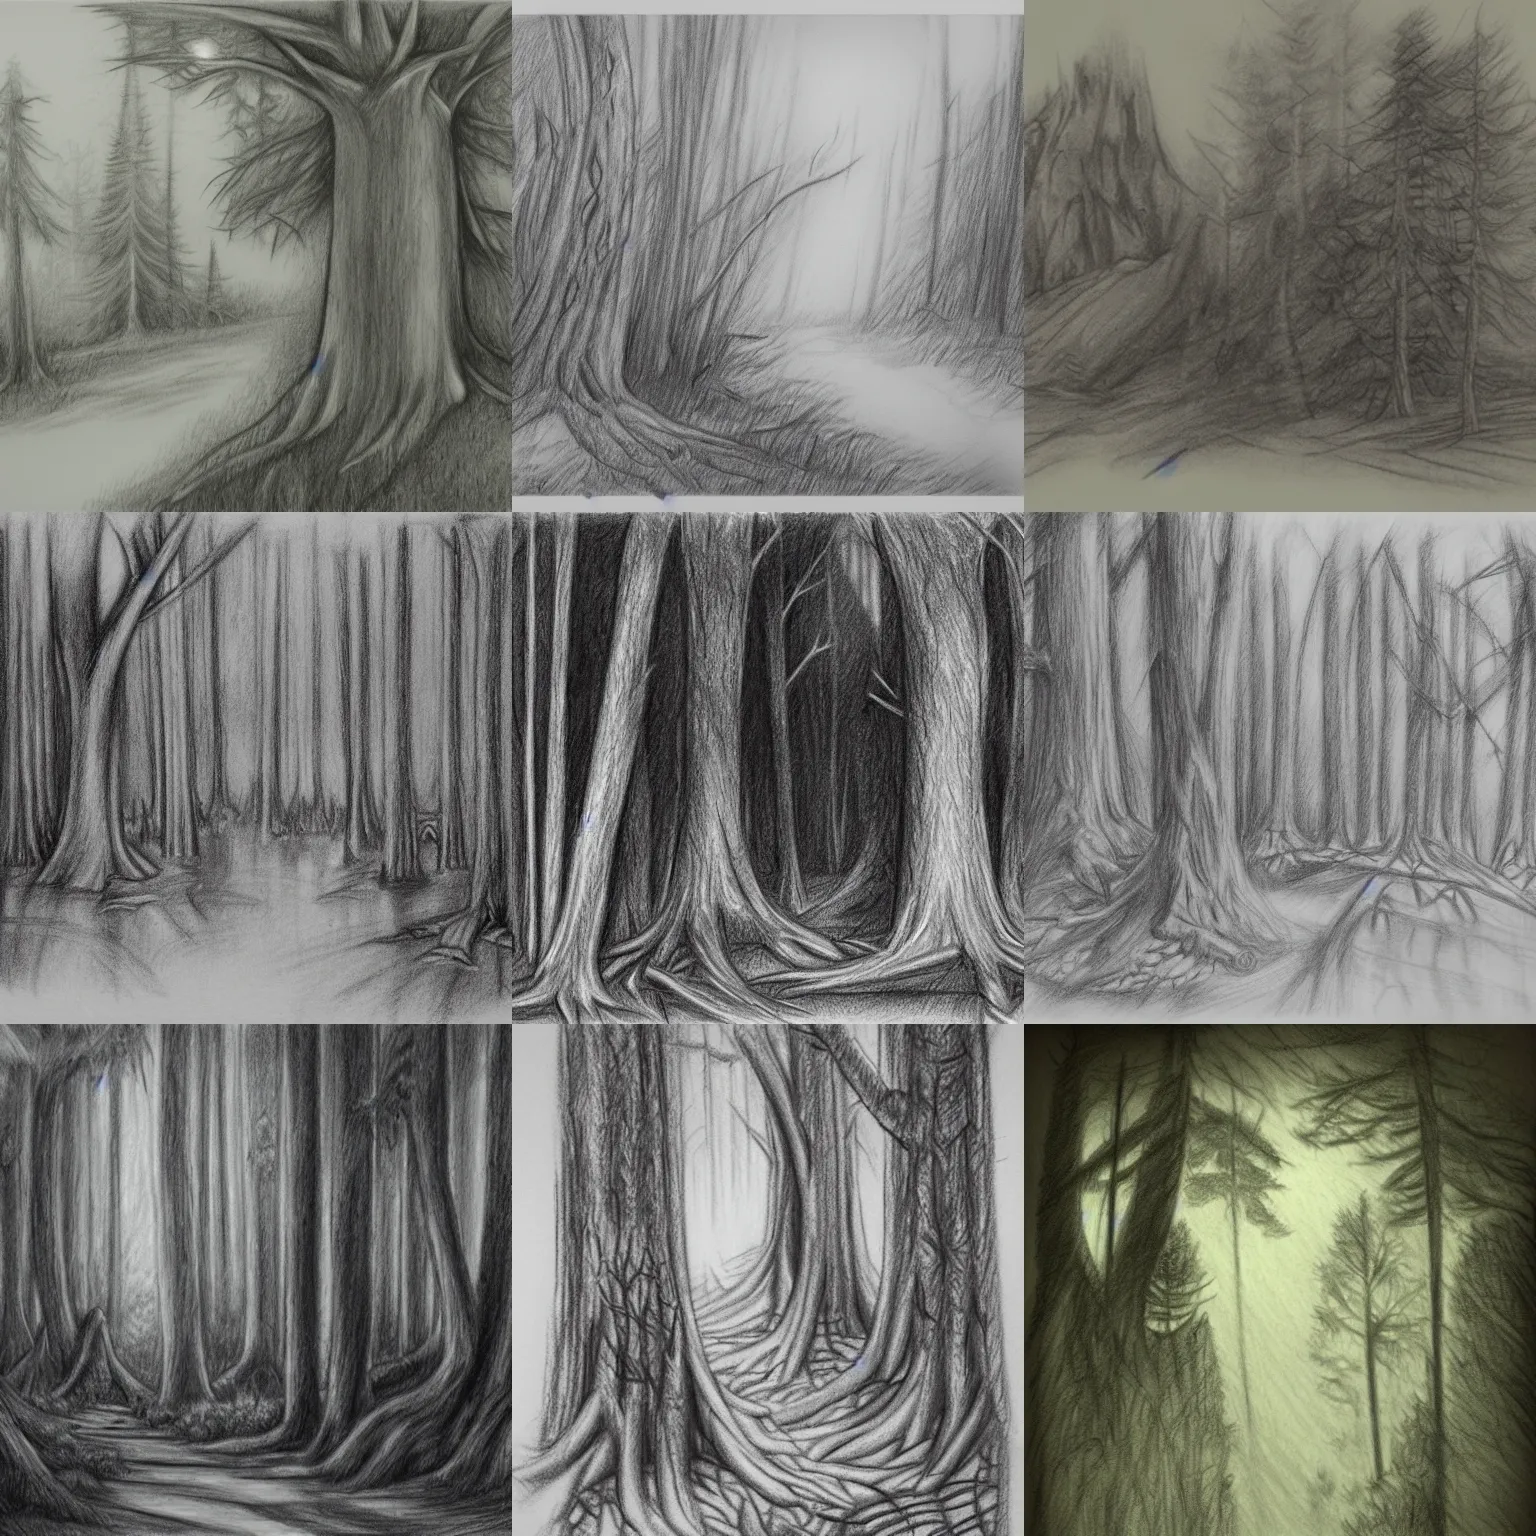 Tarang Random Pencil Sketches Pathway Forest and Human Figures